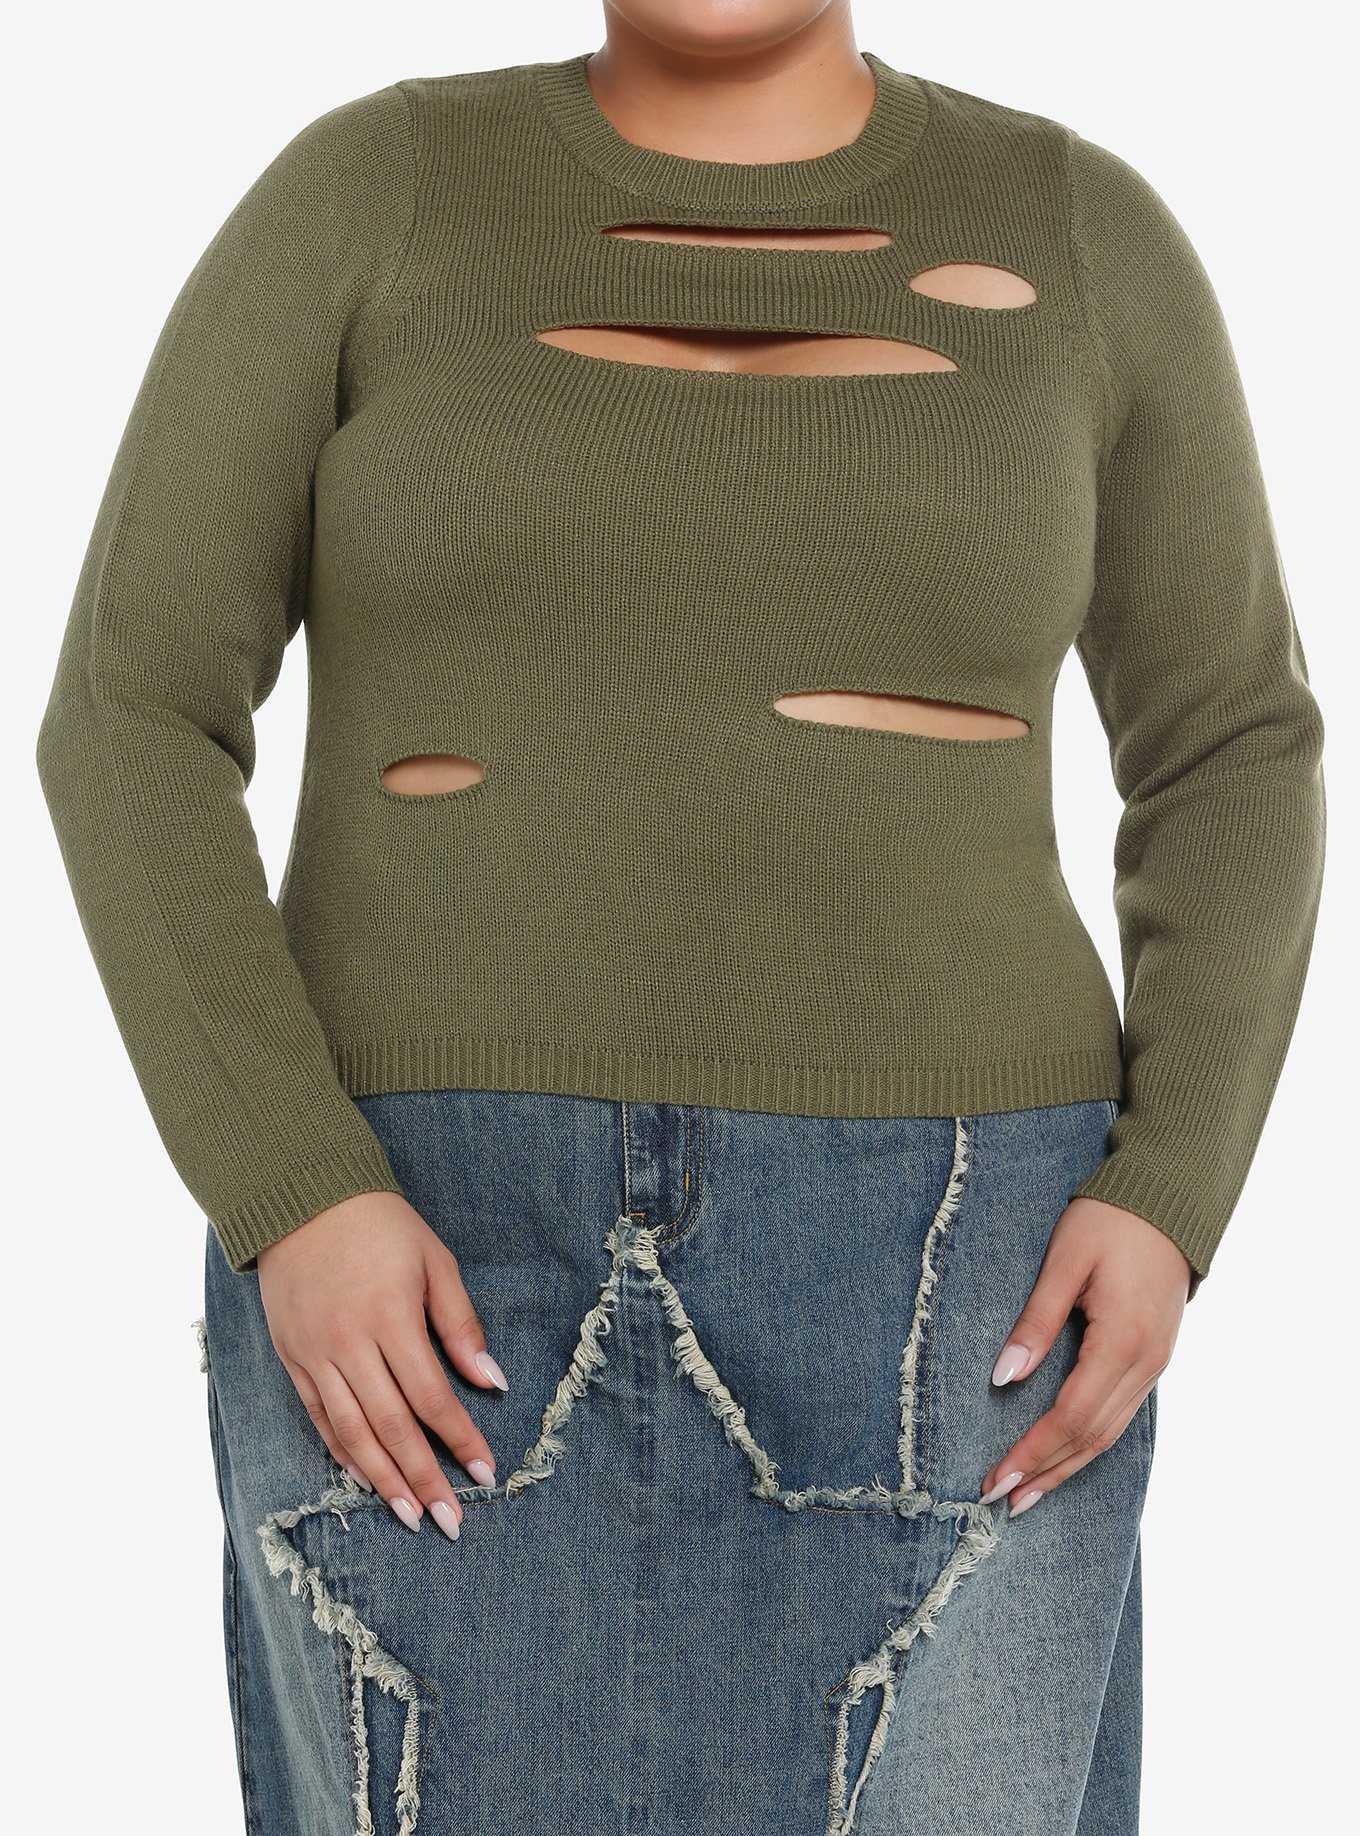 Social Collision Olive Distressed Cutout Girls Sweater Plus Size, , hi-res